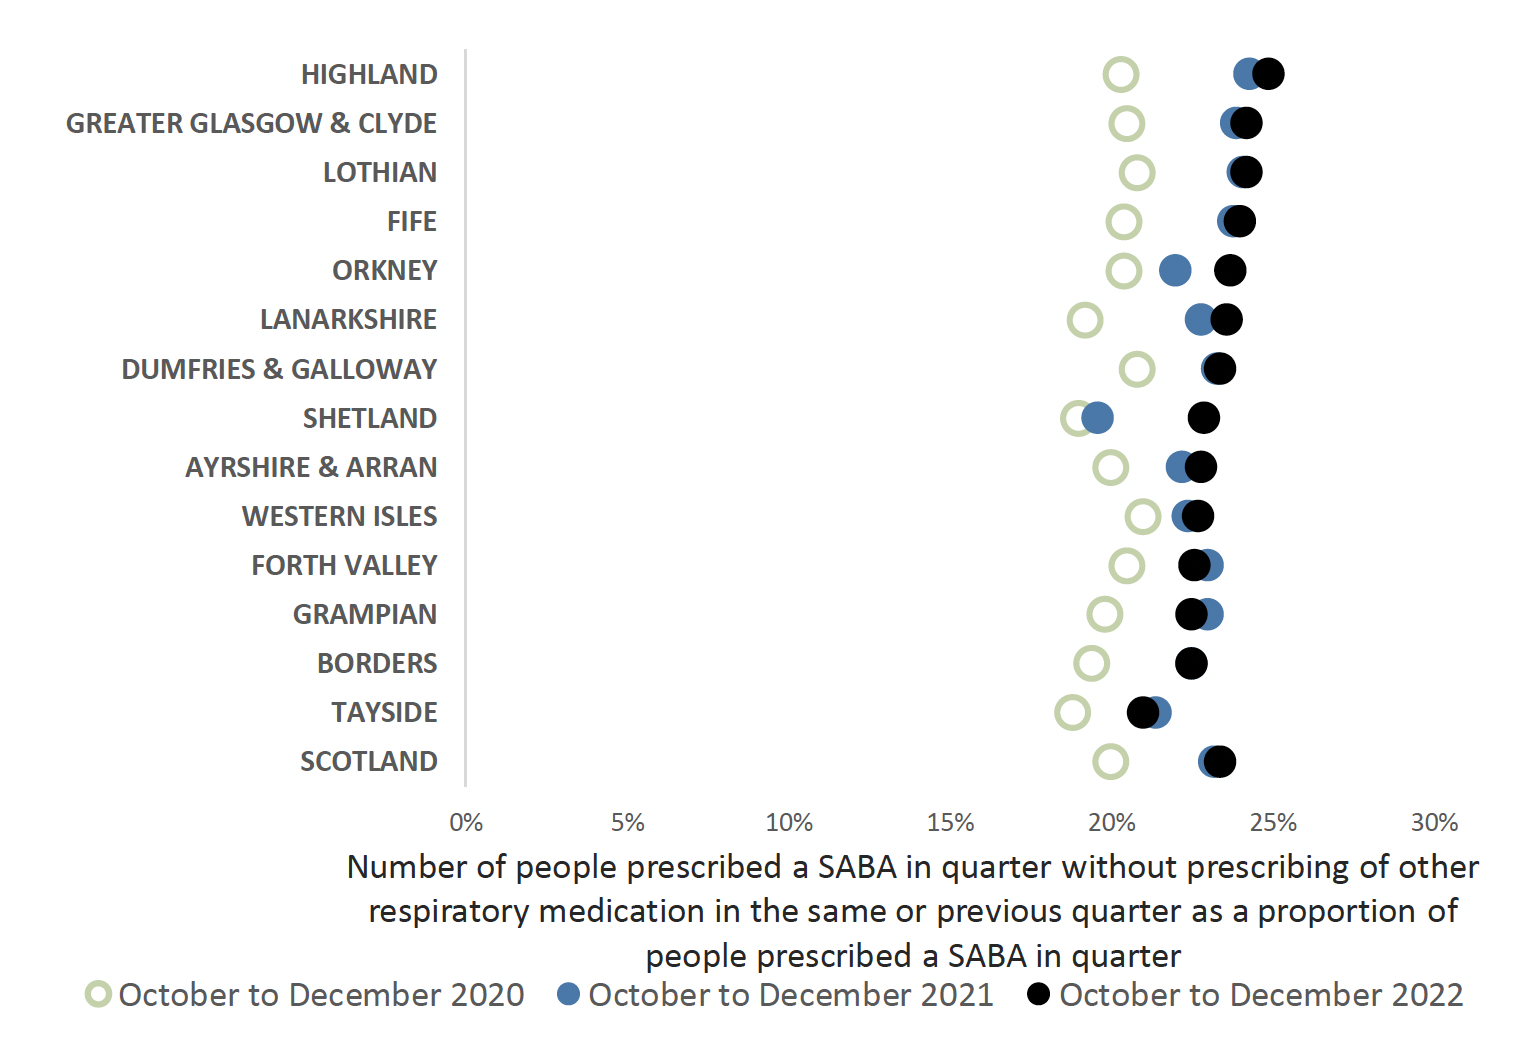 Chart showing number of people prescribed SABA only in absence of other inhalers across health boards and Scotland from 2020 to 2022. Overall Scotland trend is increasing